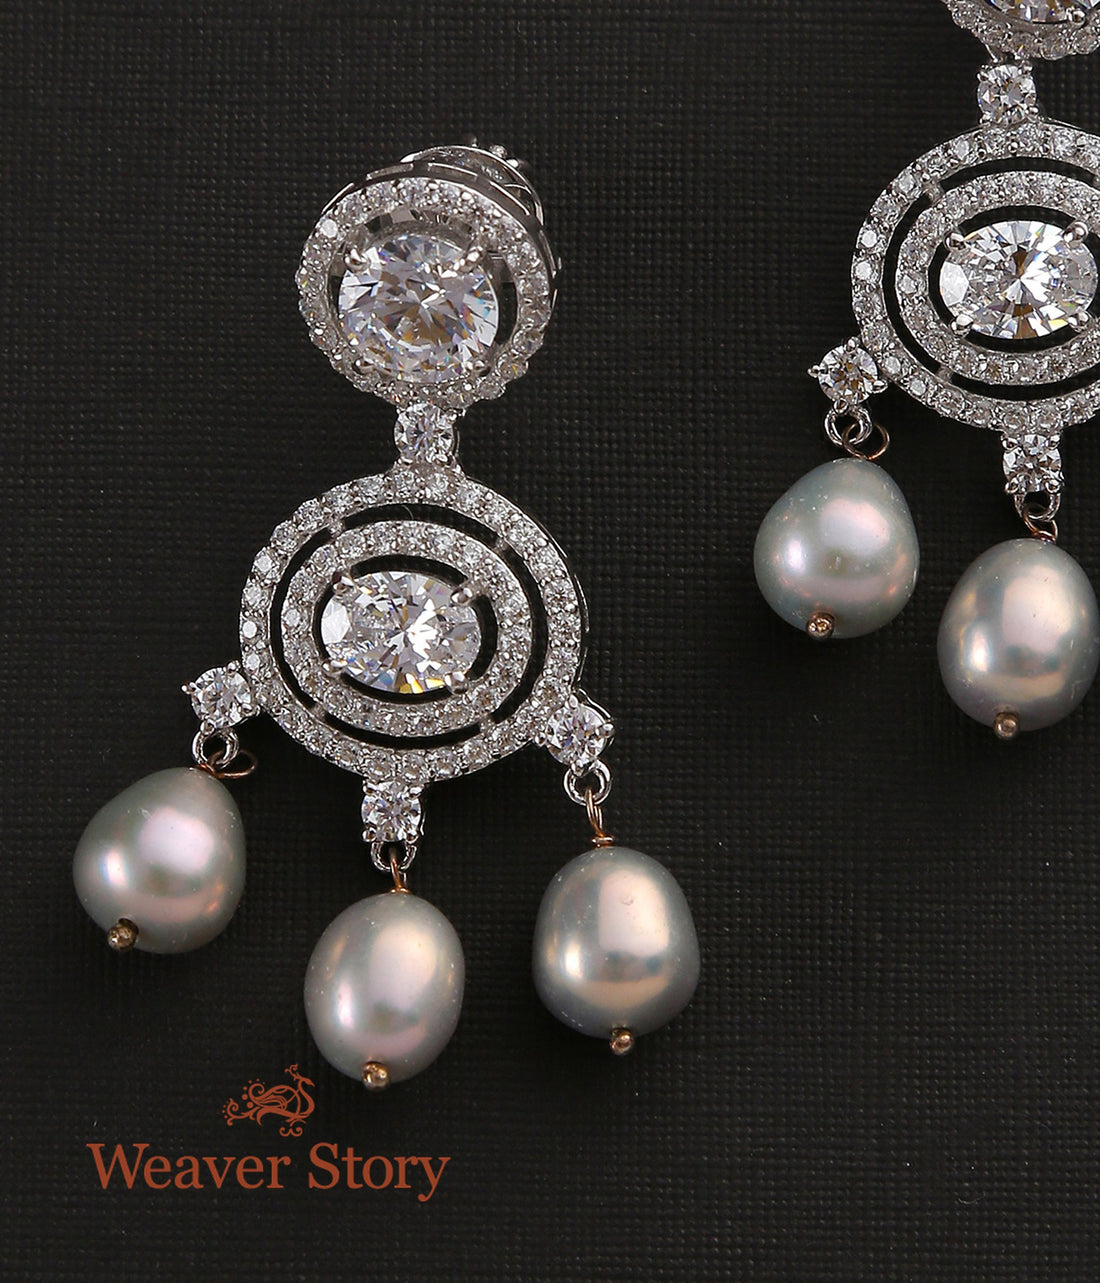 Shahina_Earrings_with_Zircons_Crafted_in_Pure_Silver_WeaverStory_02